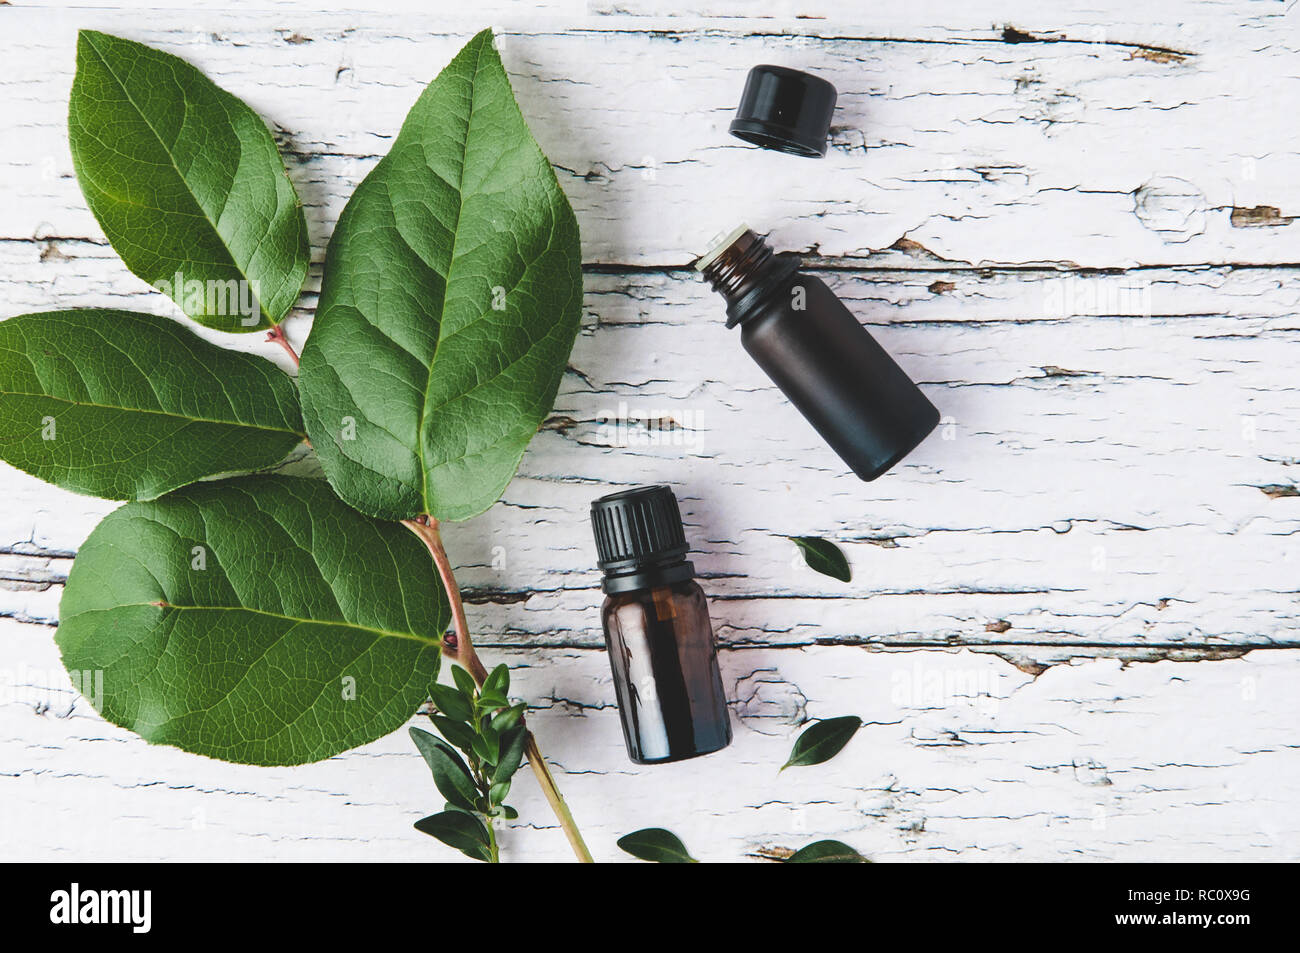 essential oils bottles with greenery on a white wooden background Stock Photo